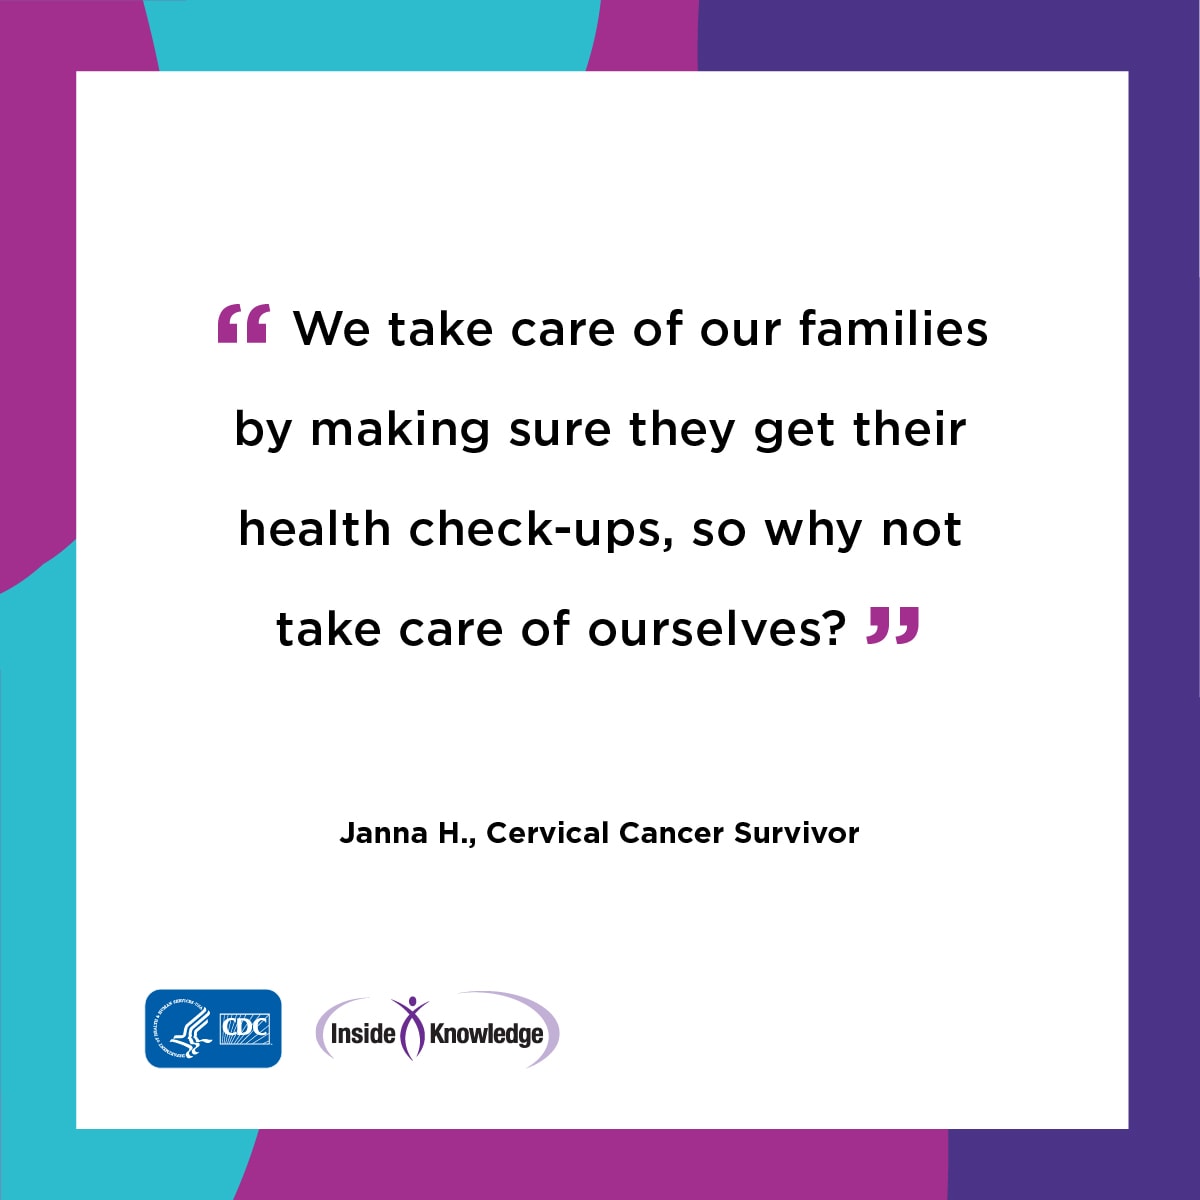 We take care of our families by making sure they by making sure they get their health check-ups, so why not take care of ourselves? Janna H. Cervical Cancer Survivor